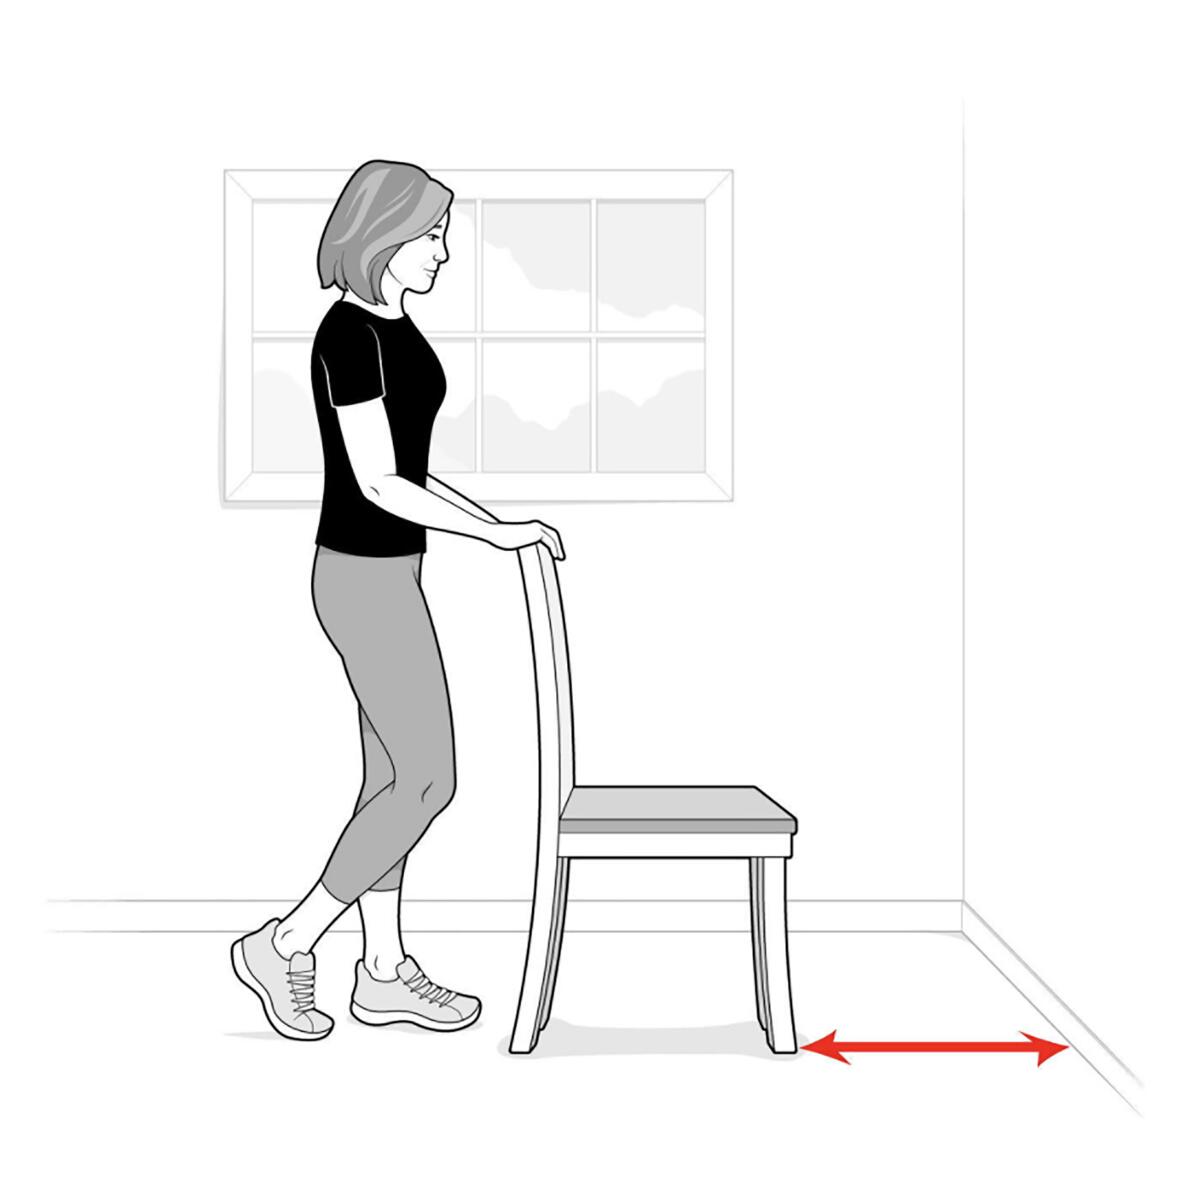 A sketch shows a woman setting a chair a few feet from a wall.